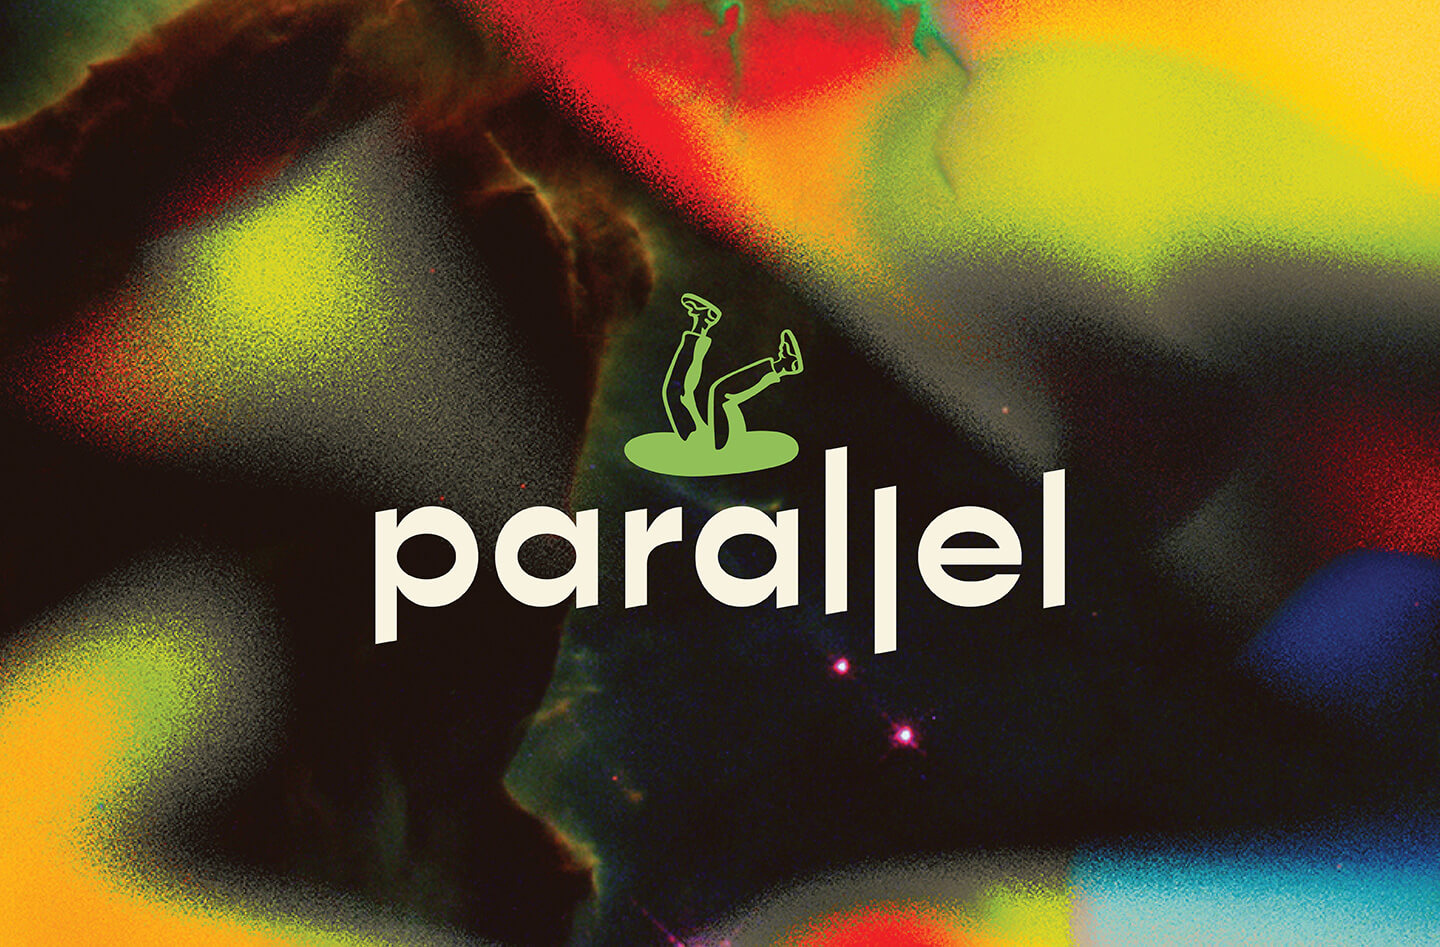 Brand design portfolio cover image for Parallel that contains a spacey-textured image with a noisy primary-coloured gradient overlaying. In the centre is the Parallel logo- a simple sans serif logotype with a small yellow illustrative icon of a pair of legs falling into a hole.